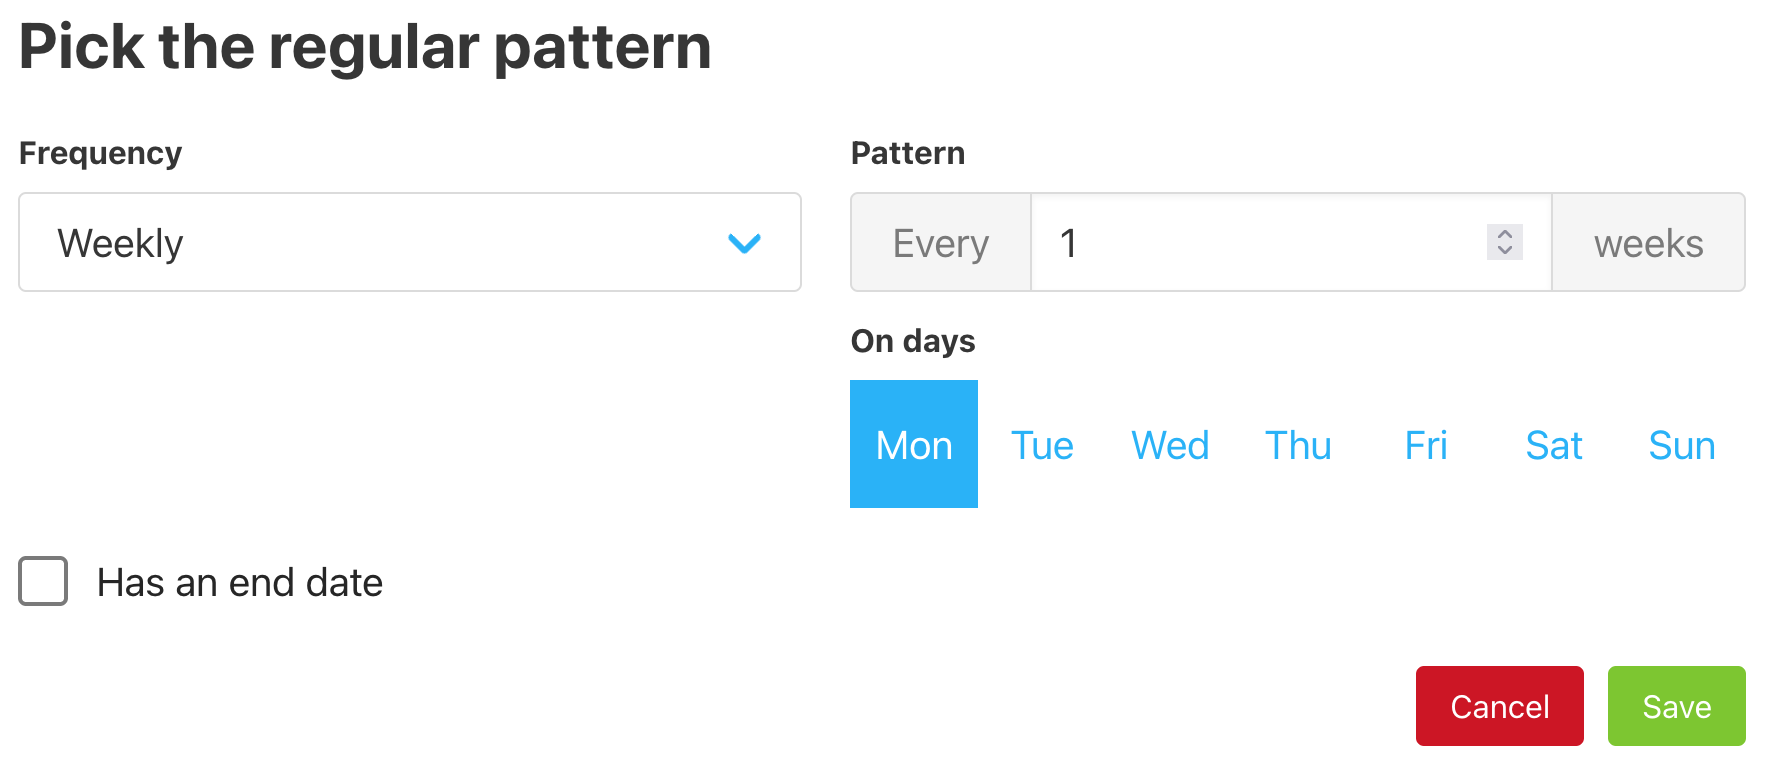 Assign the weekly pattern to a new regular booking